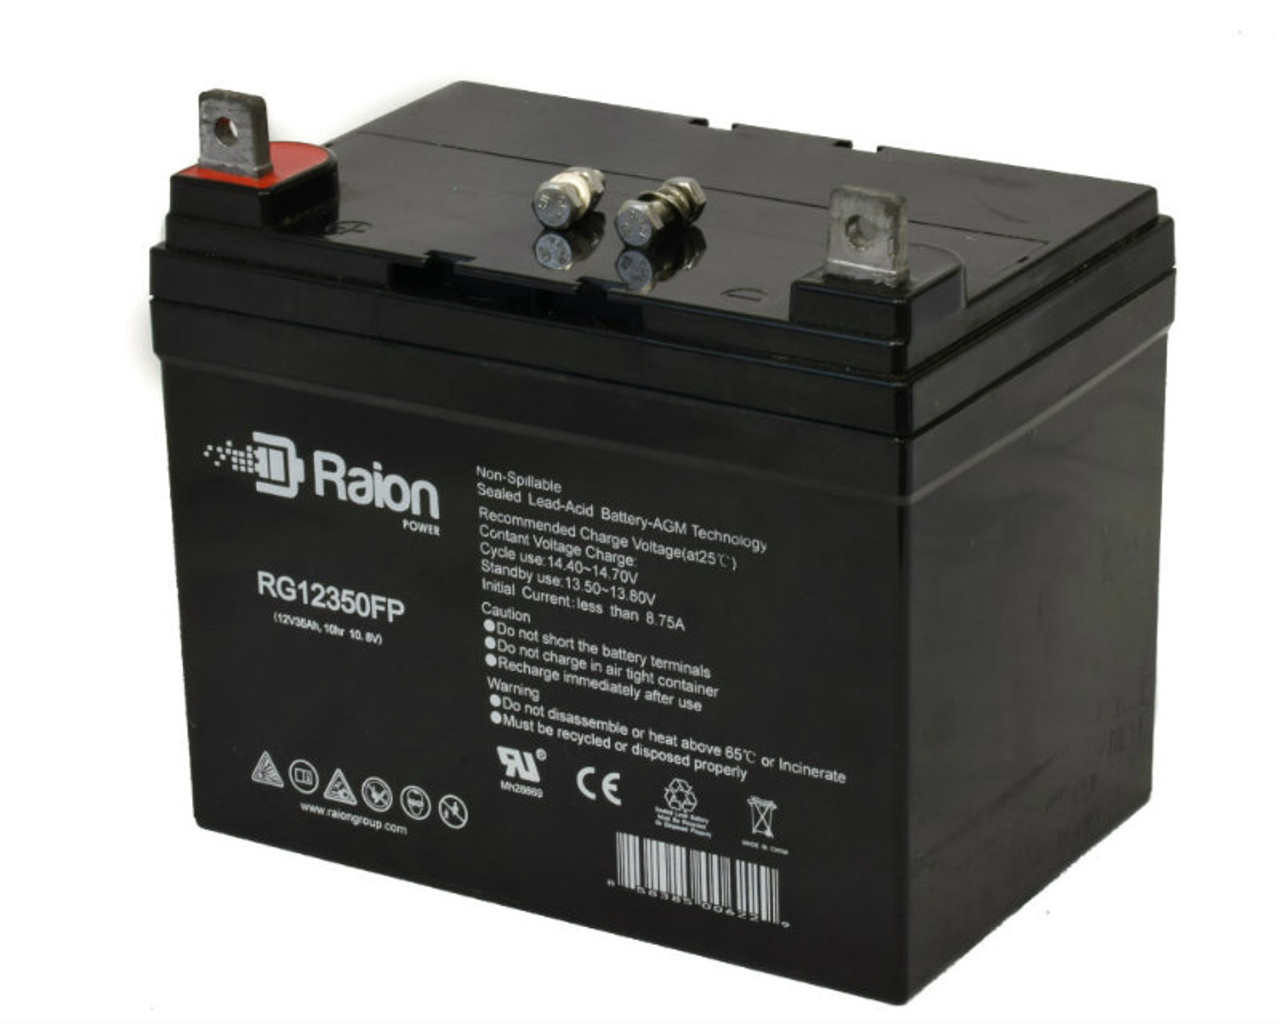 Raion Power Replacement 12V 35Ah RG12350FP Mobility Scooter Battery for Pride Mobility Jazzy Select GT